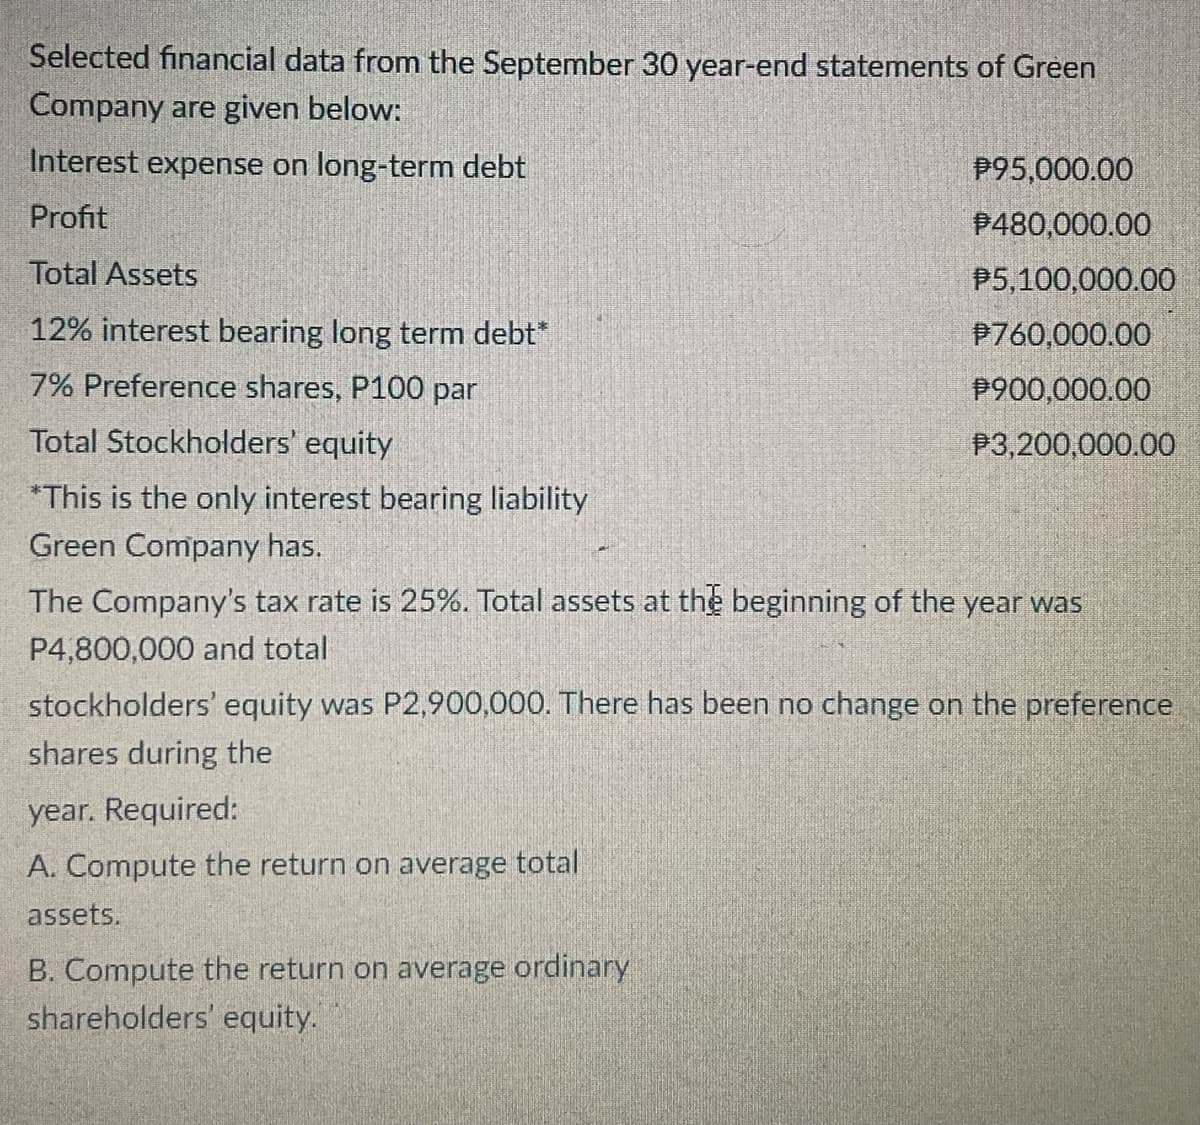 Selected financial data from the September 30 year-end statements of Green
Company are given below:
Interest expense on long-term debt
P95,000.00
Profit
P480,000.00
Total Assets
P5,100,000.00
12% interest bearing long term debt*
P760,000.00
7% Preference shares, P100 par
P900,000.00
Total Stockholders' equity
P3,200,000.00
*This is the only interest bearing liability
Green Company has.
The Company's tax rate is 25%. Total assets at the beginning of the year was
P4,800,000 and total
stockholders' equity was P2,900,000. There has been no change on the preference
shares during the
year. Required:
A. Compute the return on average total
assets.
B. Compute the return on average ordinary
shareholders' equity.
